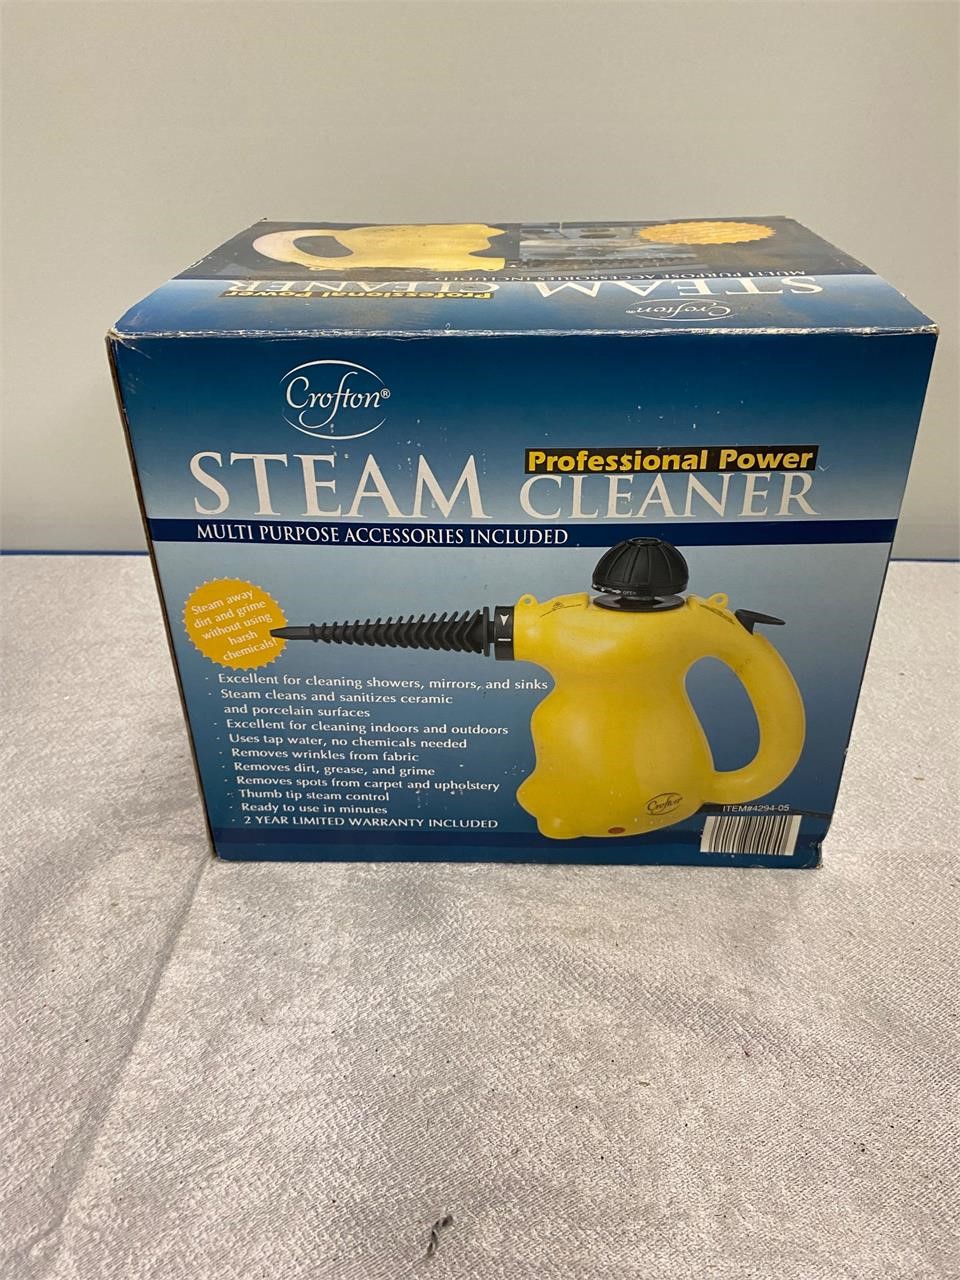 Steam cleaner in box